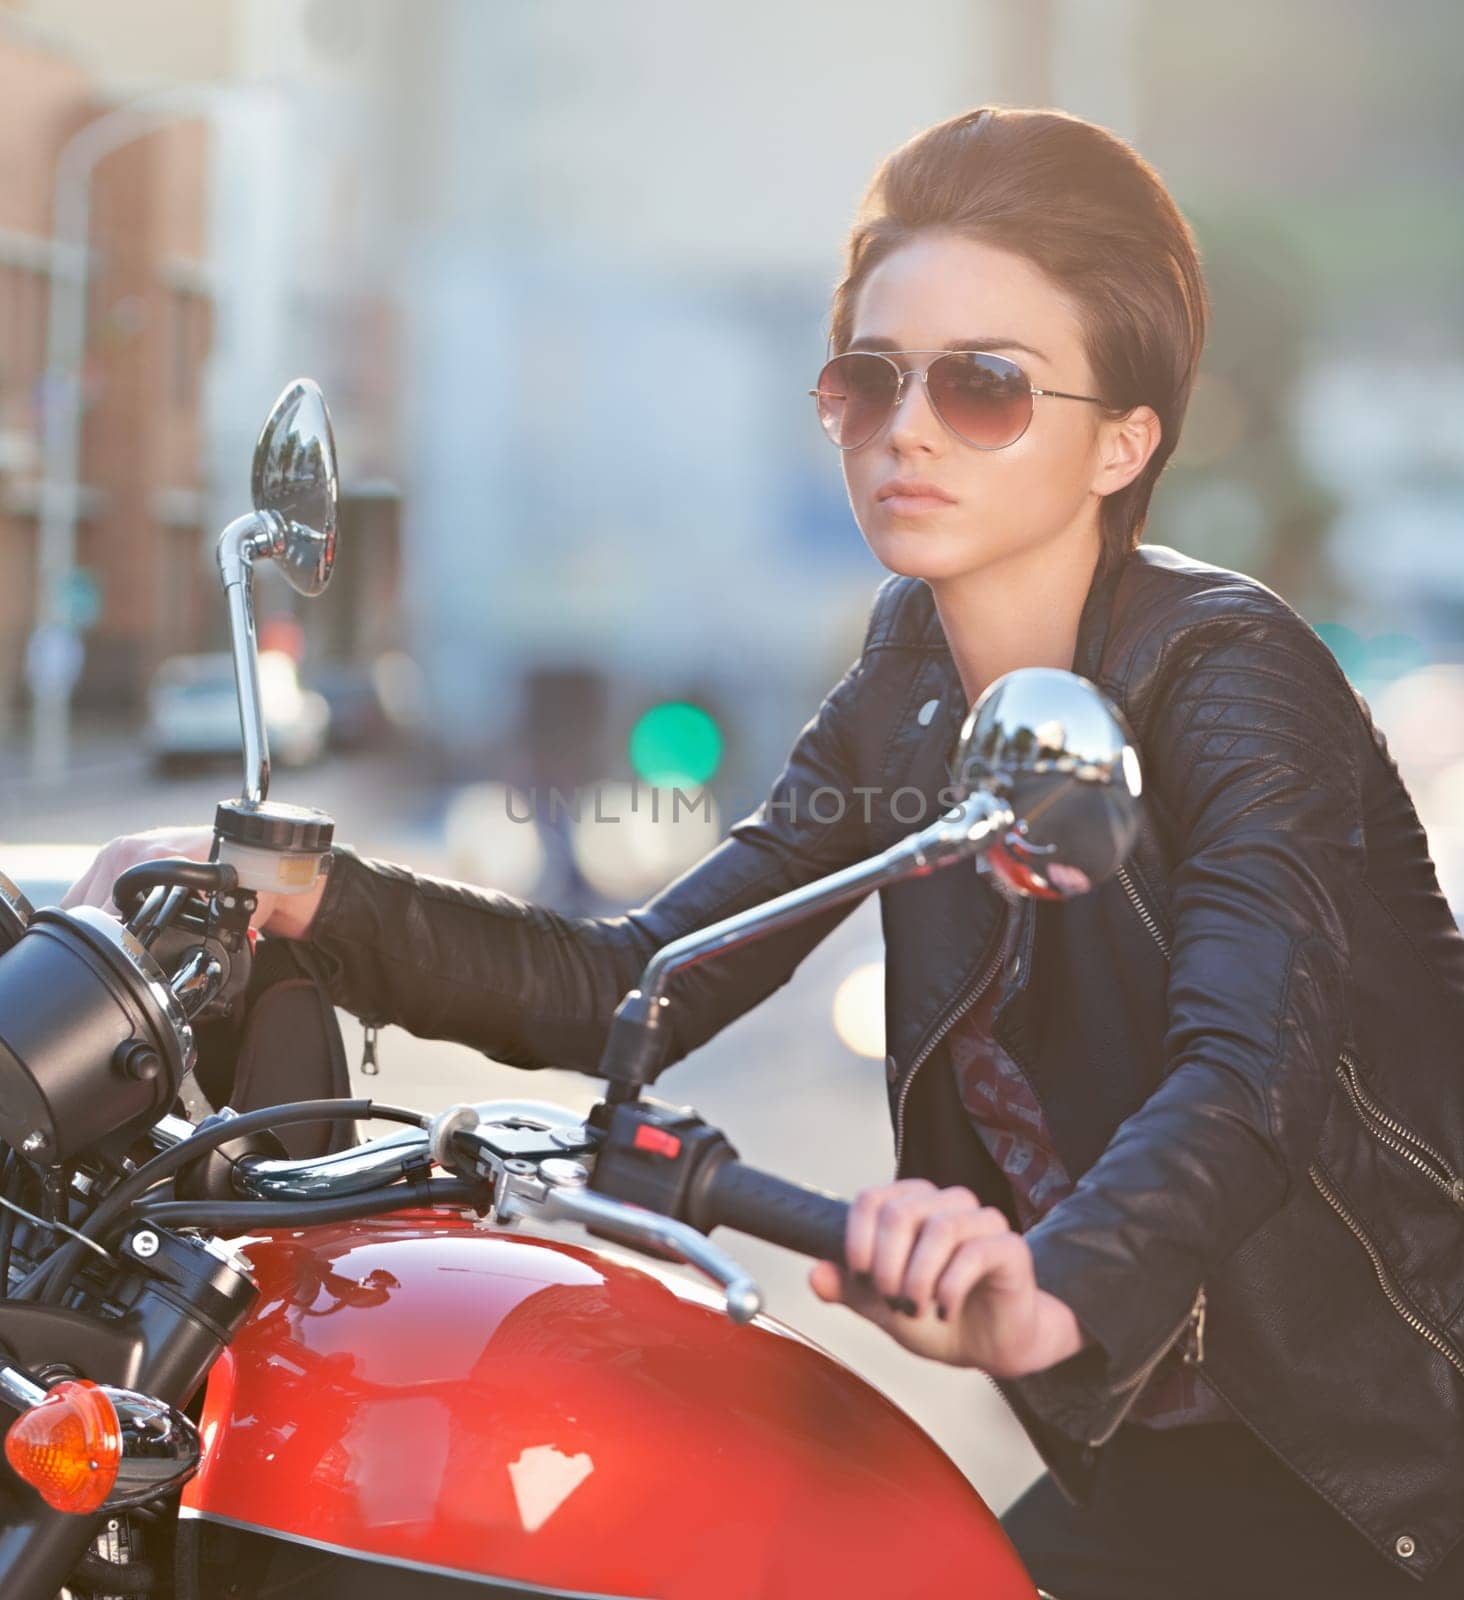 Motorcycle, power and woman in city with sunglasses for travel, transport or road trip as rebel. Fashion, street and model in leather jacket on classic or vintage bike for transportation or journey by YuriArcurs